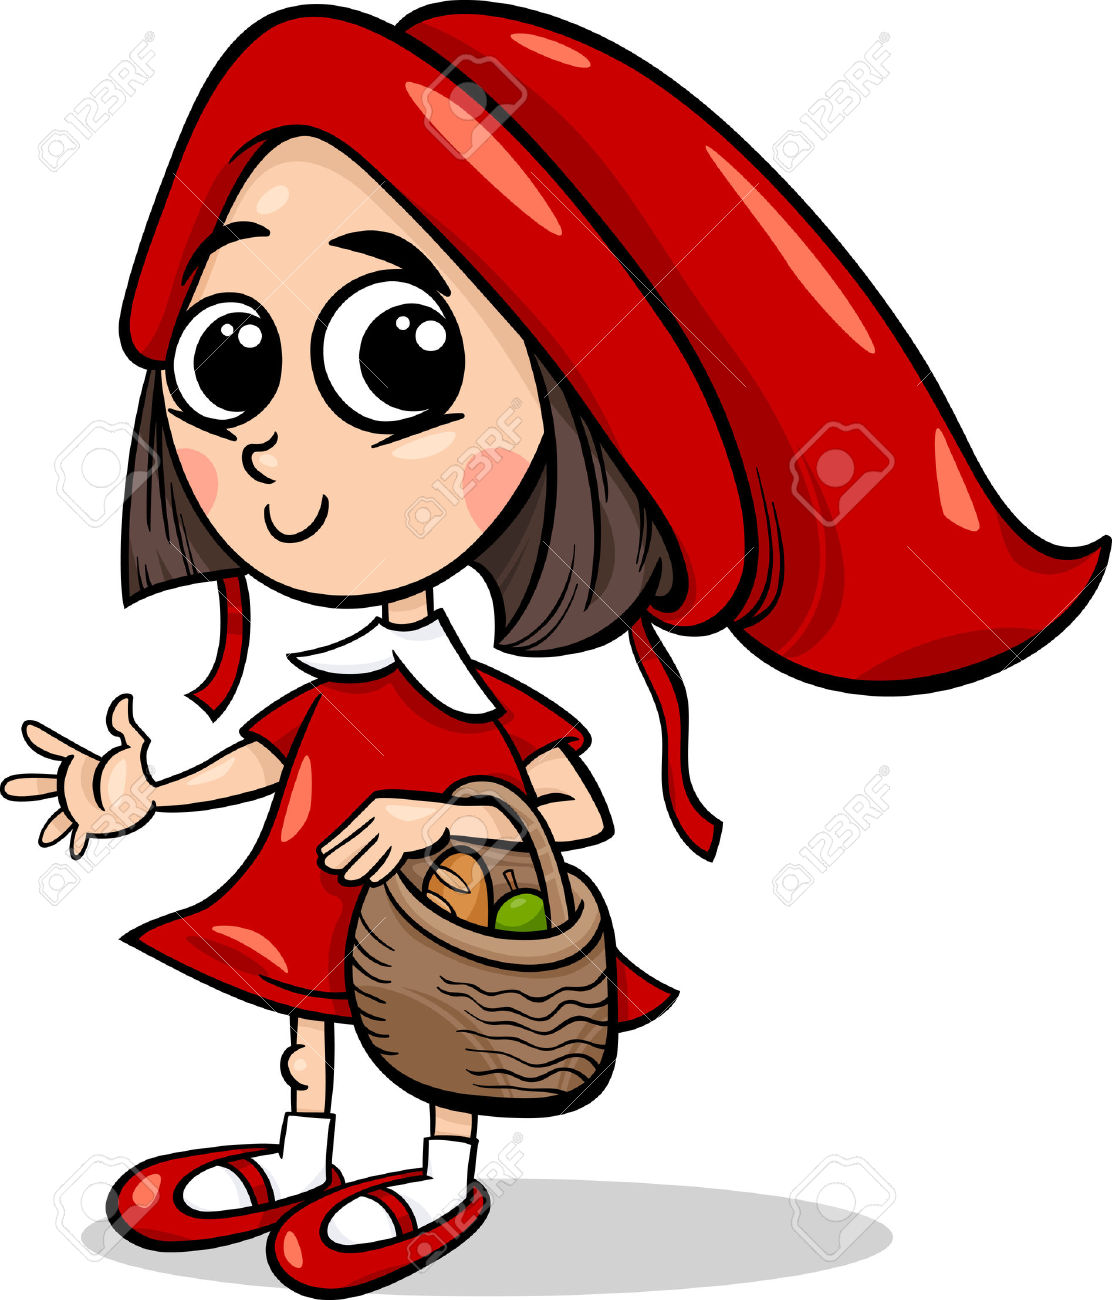 Little red riding hood clipart 20 free Cliparts | Download ...